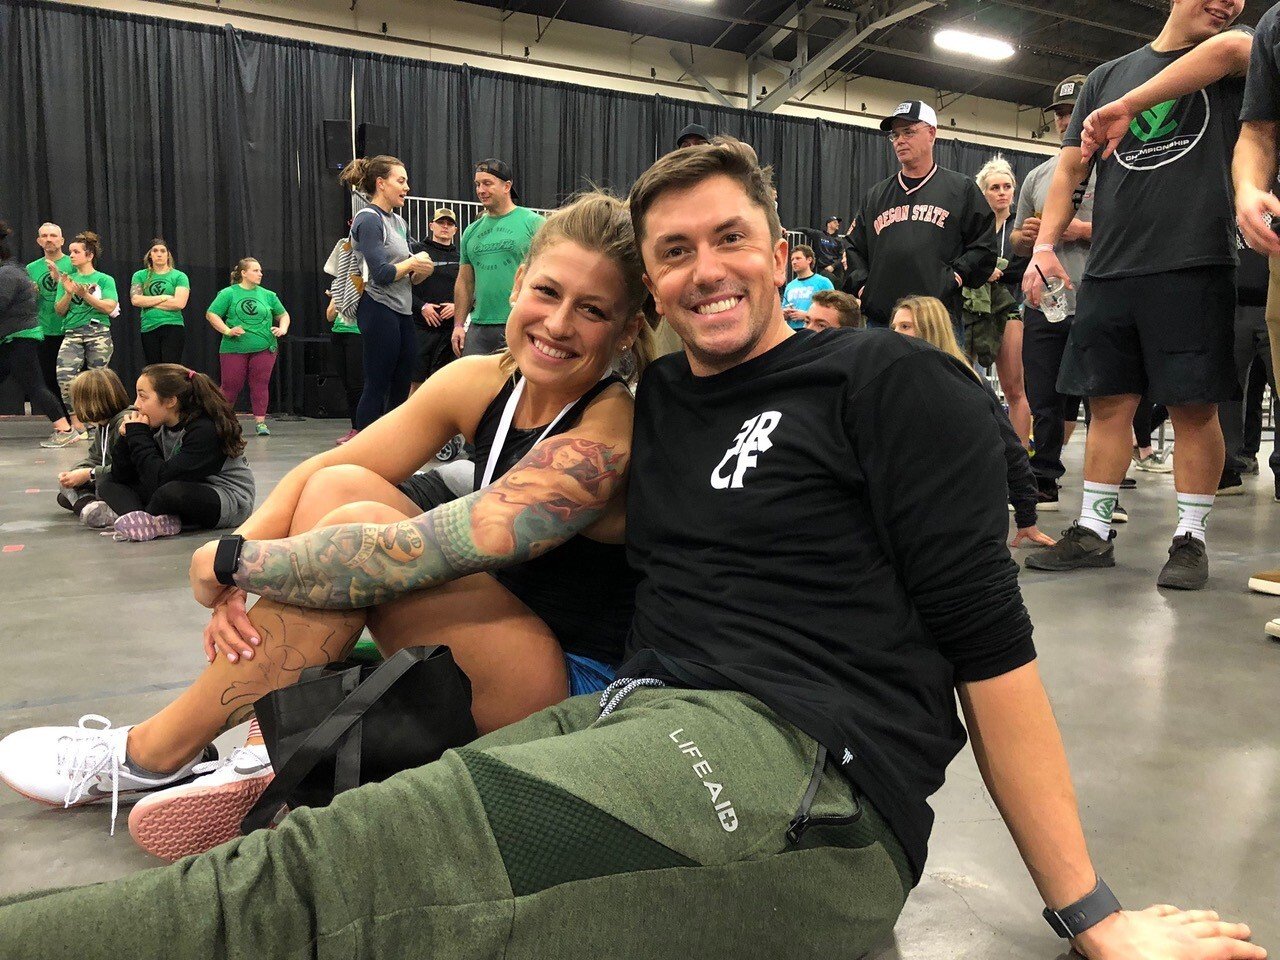 Owners Kevin and Bri Cummo met at a CrossFit gym in Vancouver and opened their own gym in 2017.